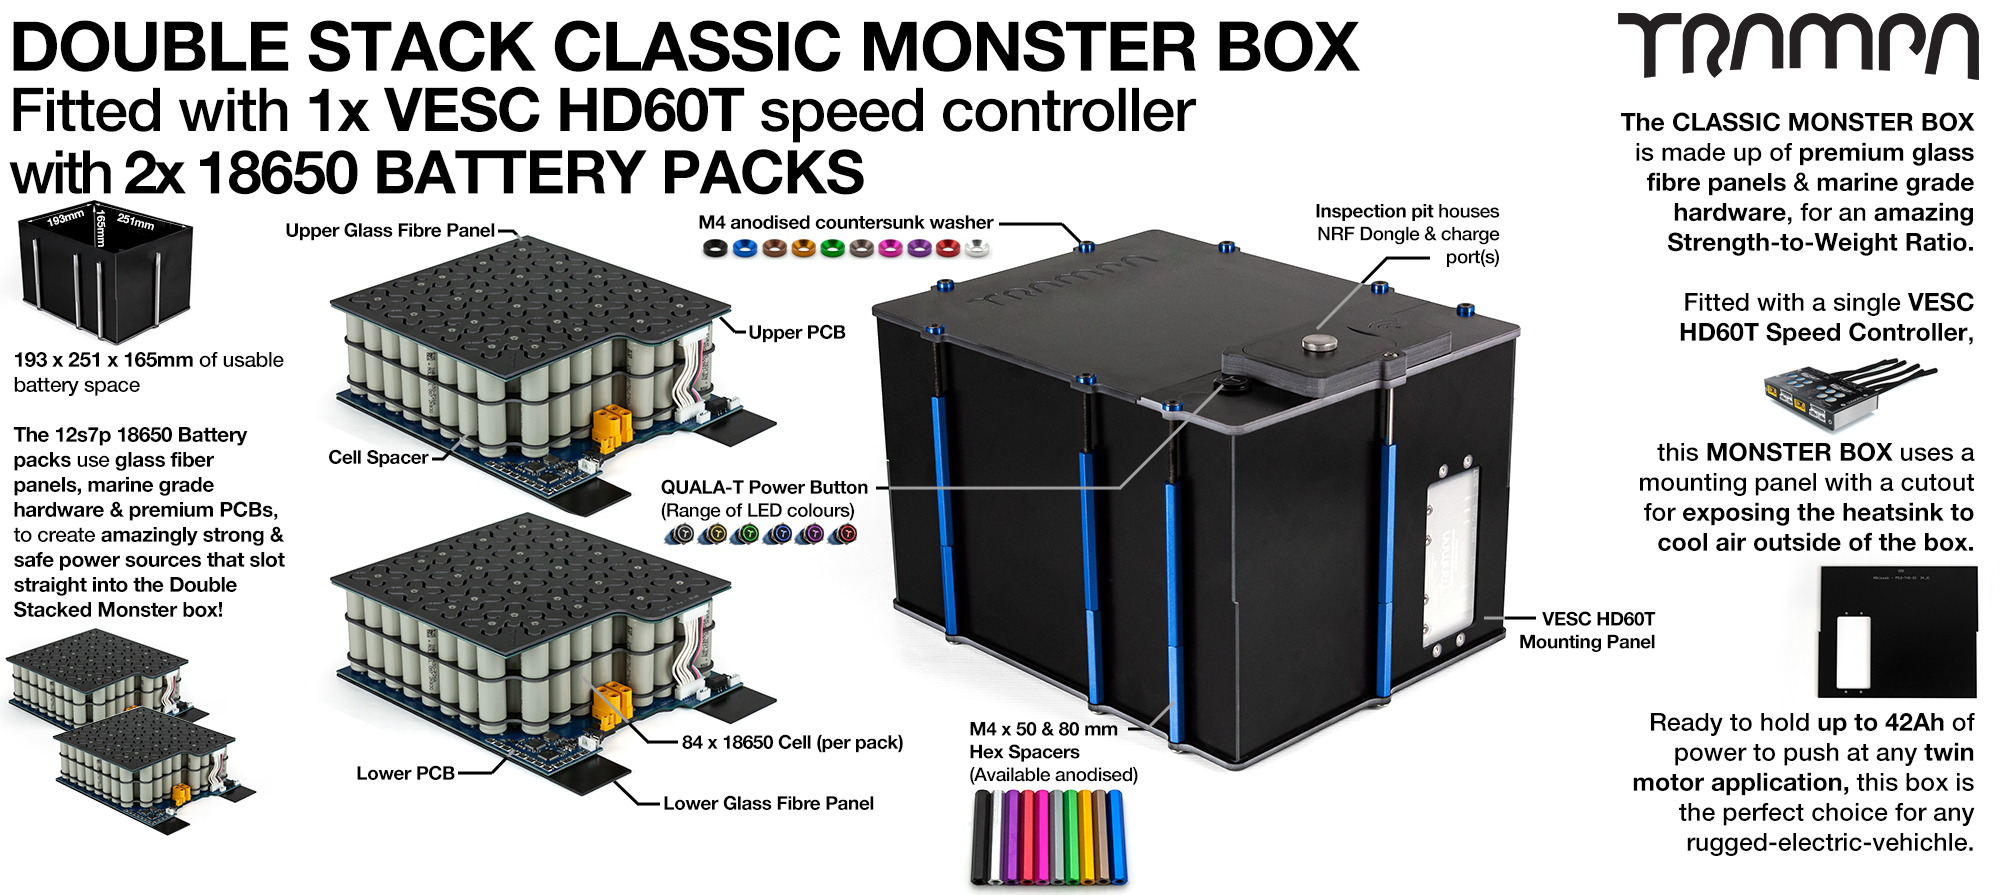 Classic MONSTER Box MkV DOUBLE STACKER - with 18650 PCB Pack, 1x VESC HD-60Twin & 168x 18650 cells 12s7p 21Ah - PCB based Battery Pack with Integrated Battery Management System (BMS) - UK CUSTOMERS ONLY